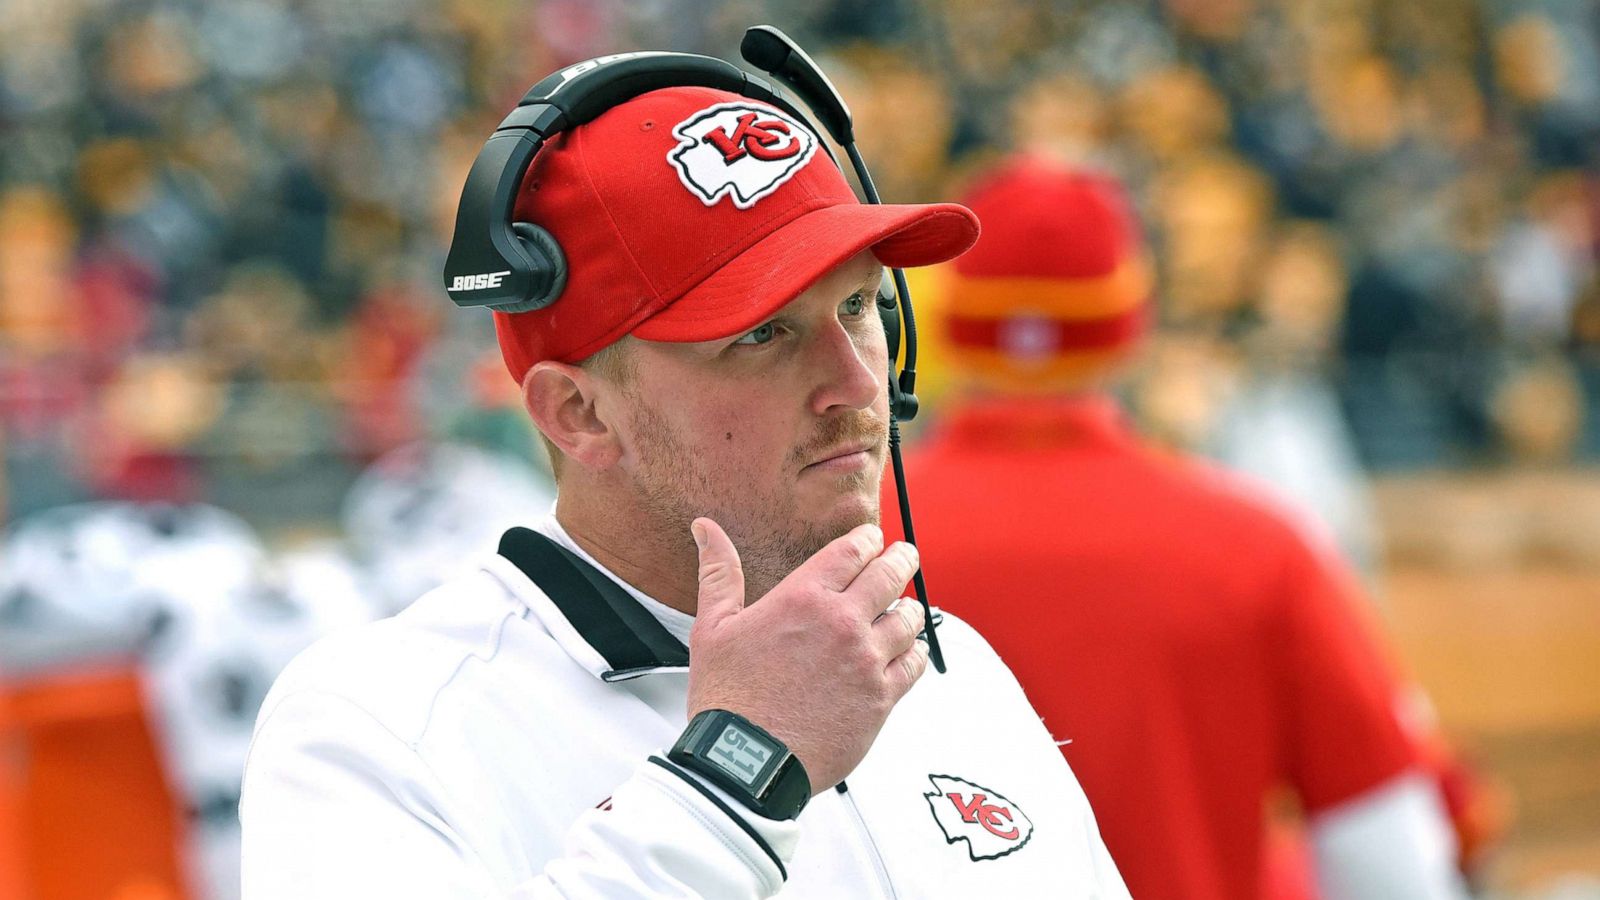 Britt Reid, Chiefs assistant coach and son of Andy Reid, involved in crash  that seriously injured child - ABC News